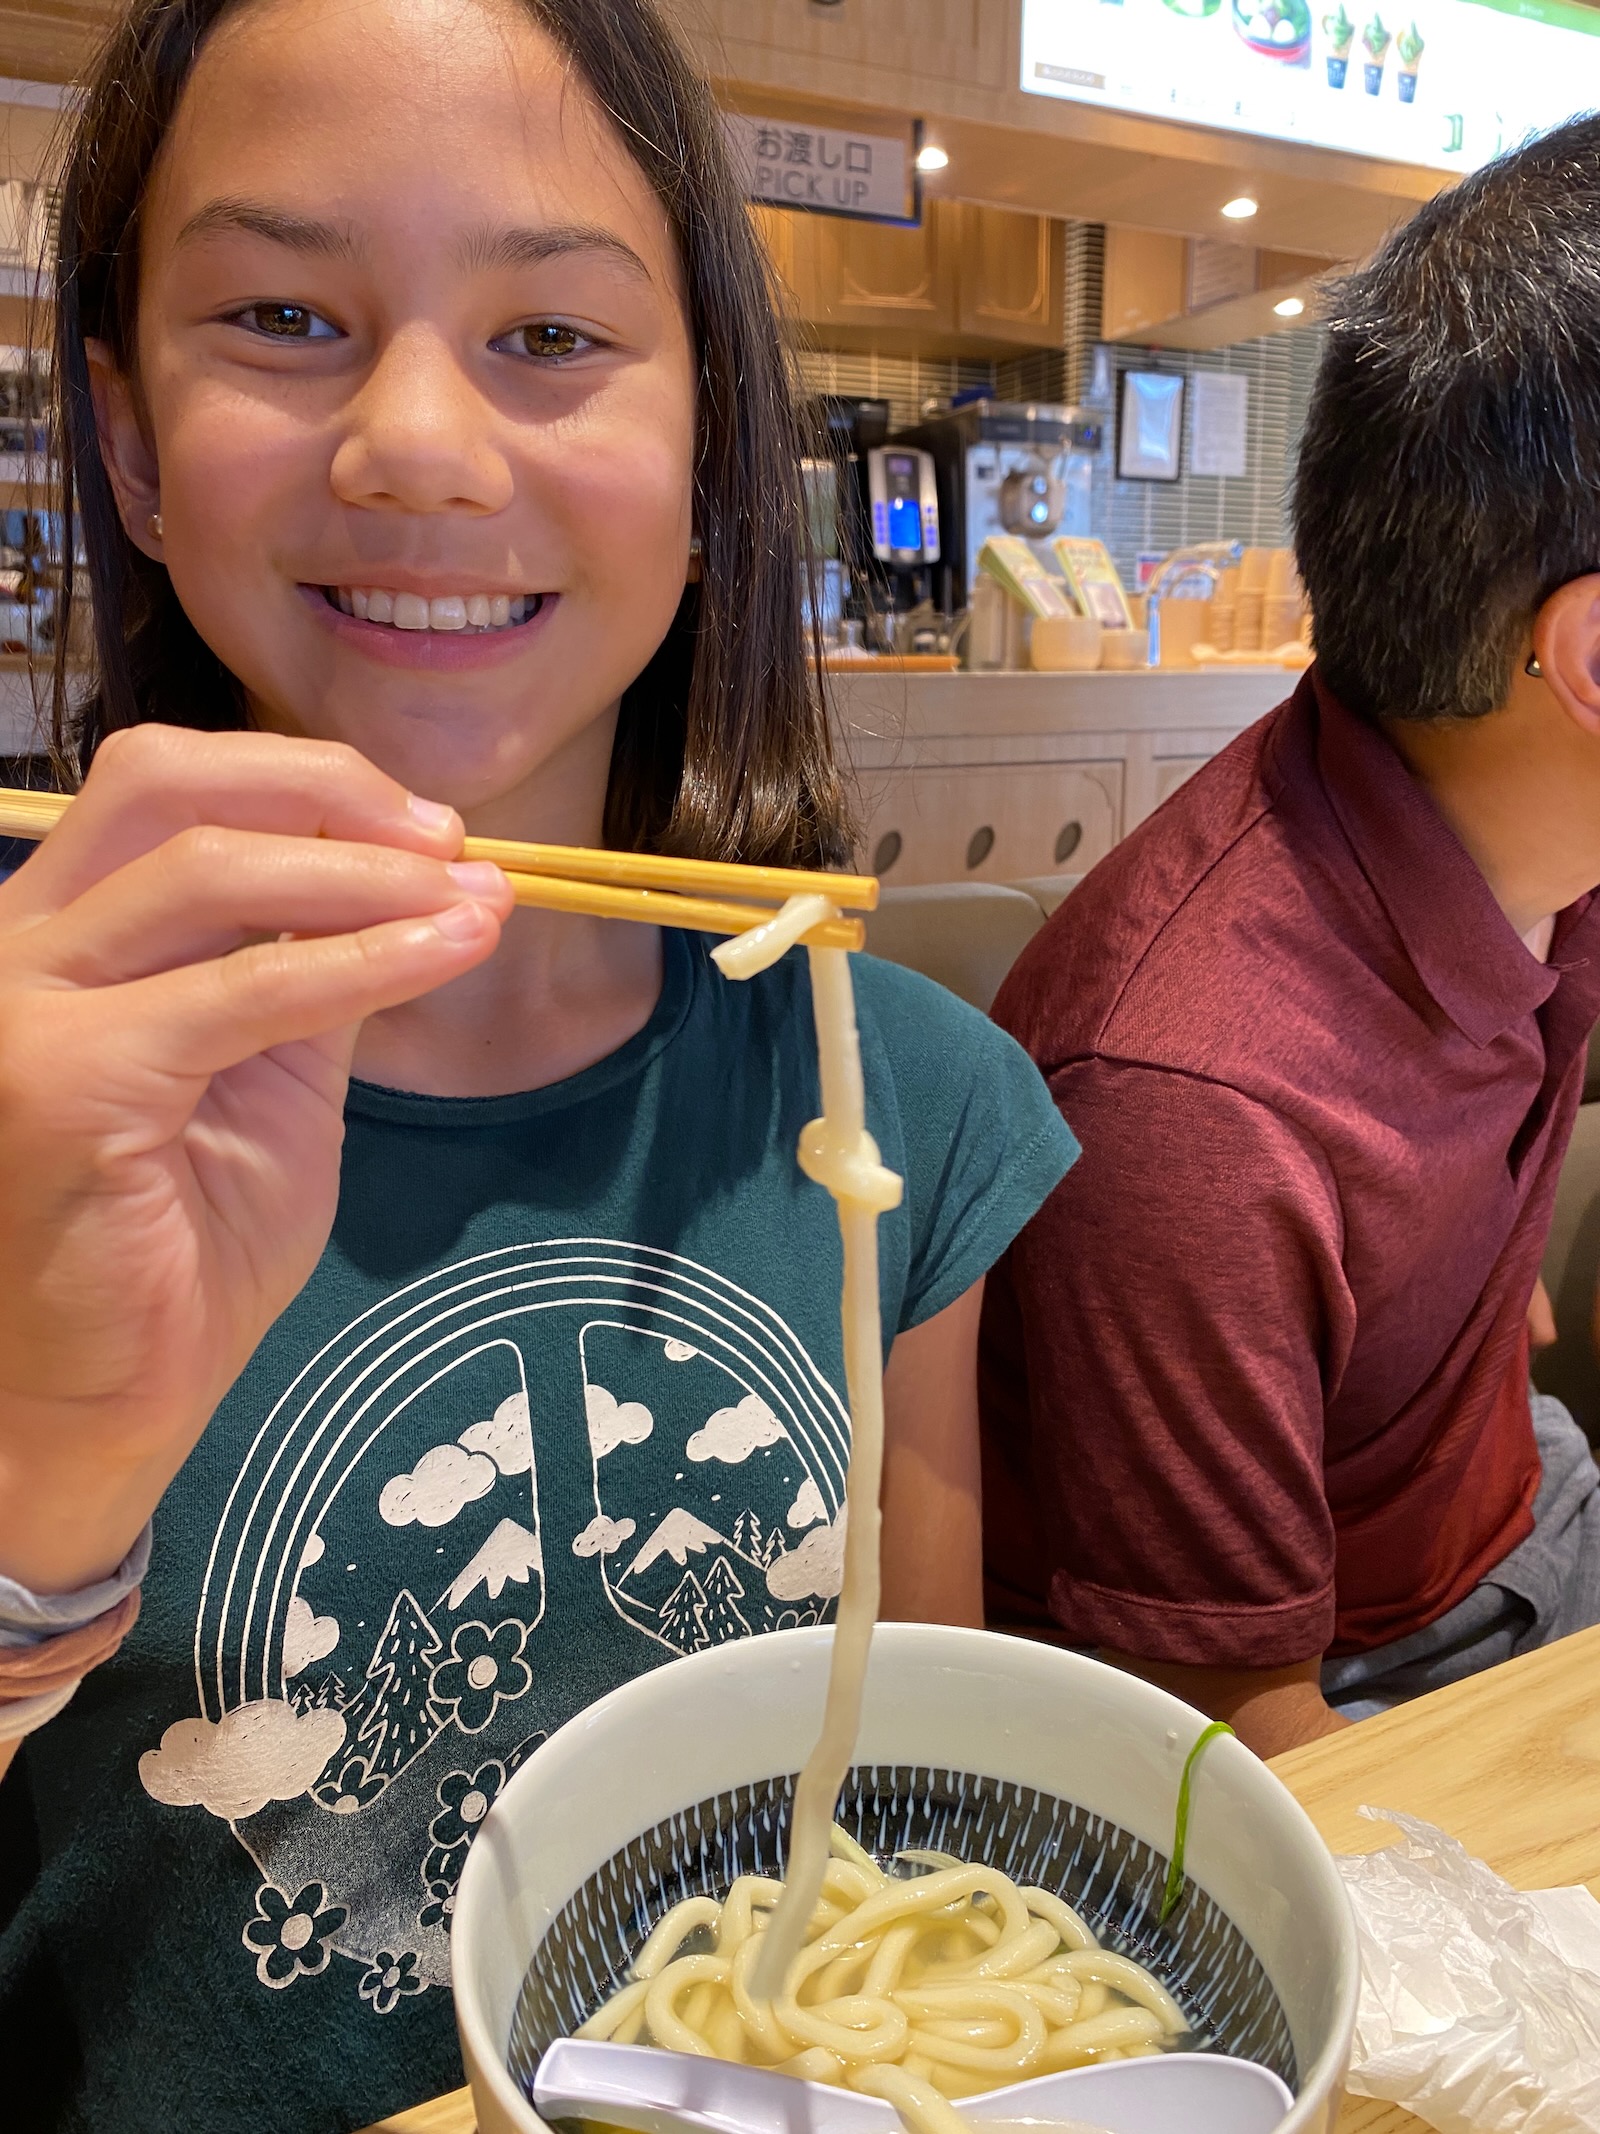 A girl in a green shirt uses chopsticks to hold up an udon noodle with a knot in it.